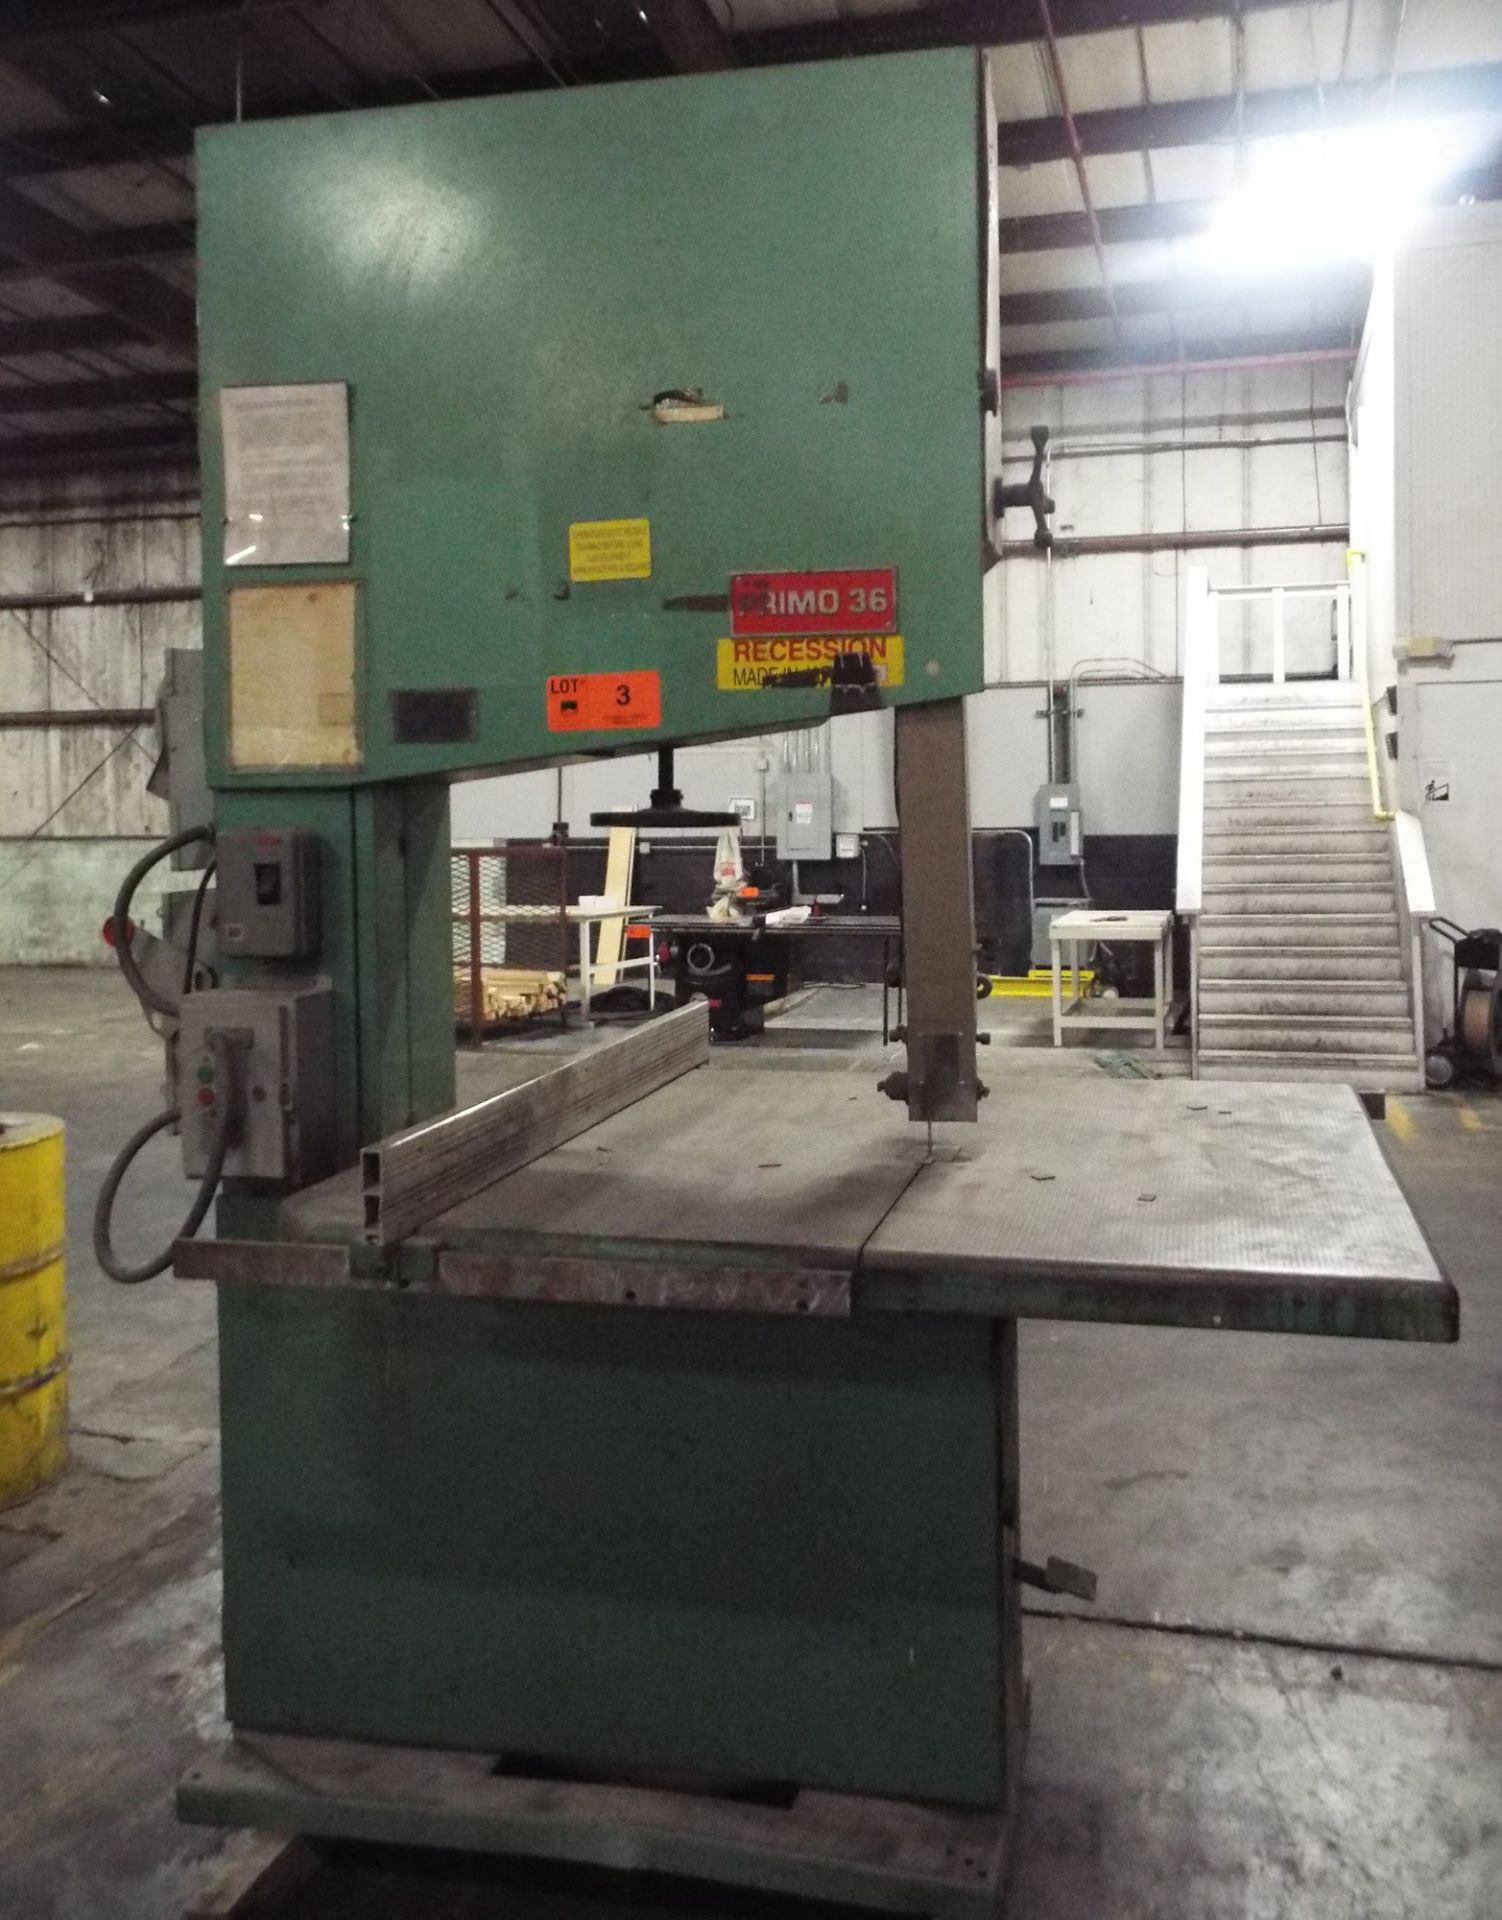 PRIMO 36 HEAVY DUTY VERTICAL BAND SAW WITH 48"X56" TABLE, 34" THROAT, APPROX. 27" MAX. WORK PIECE